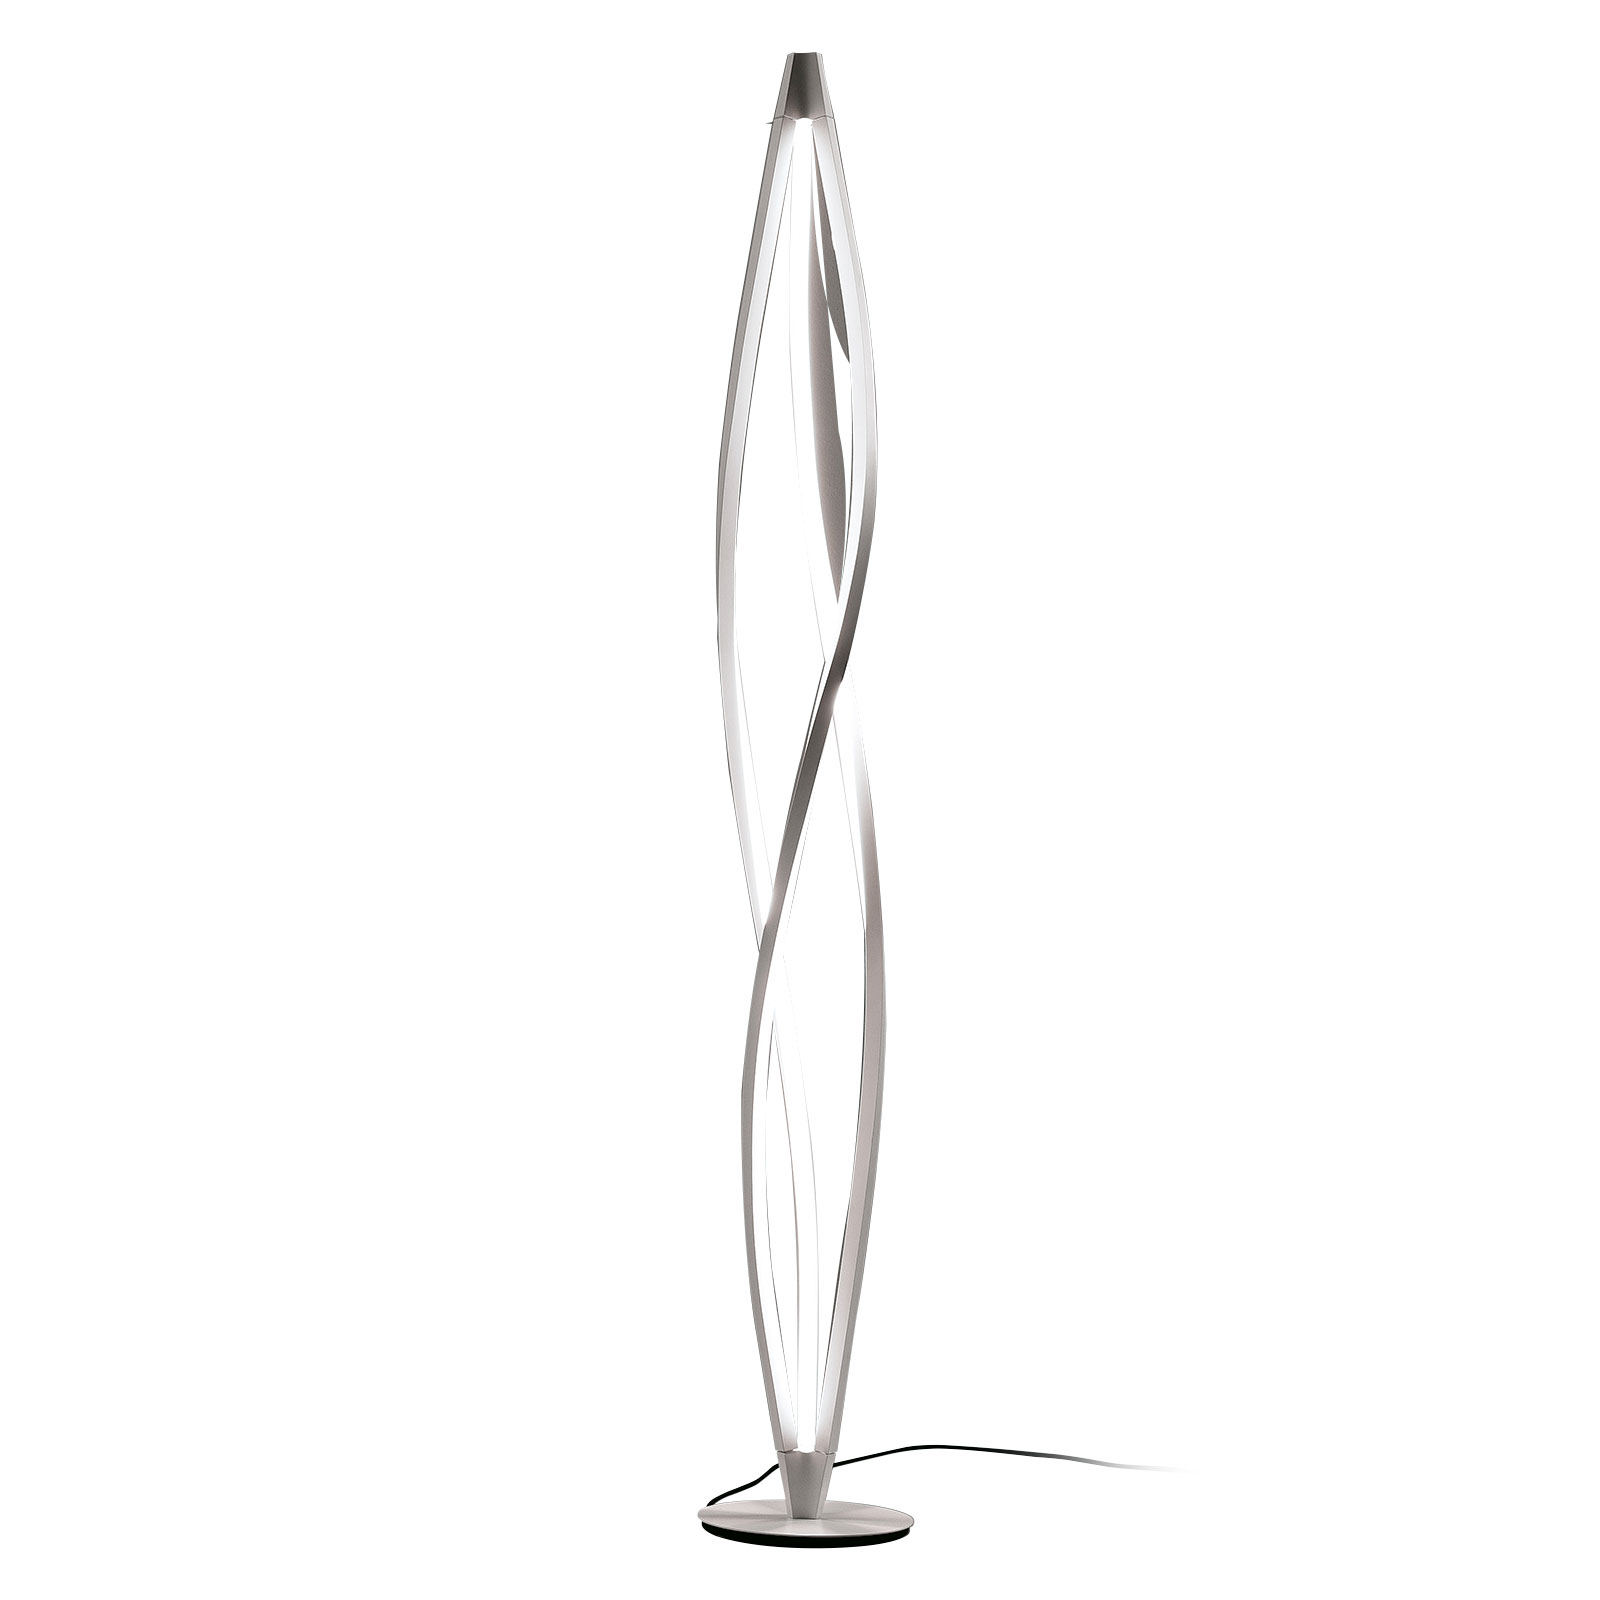 Nemo In The Wind floor lamp 2,700K white lacquered